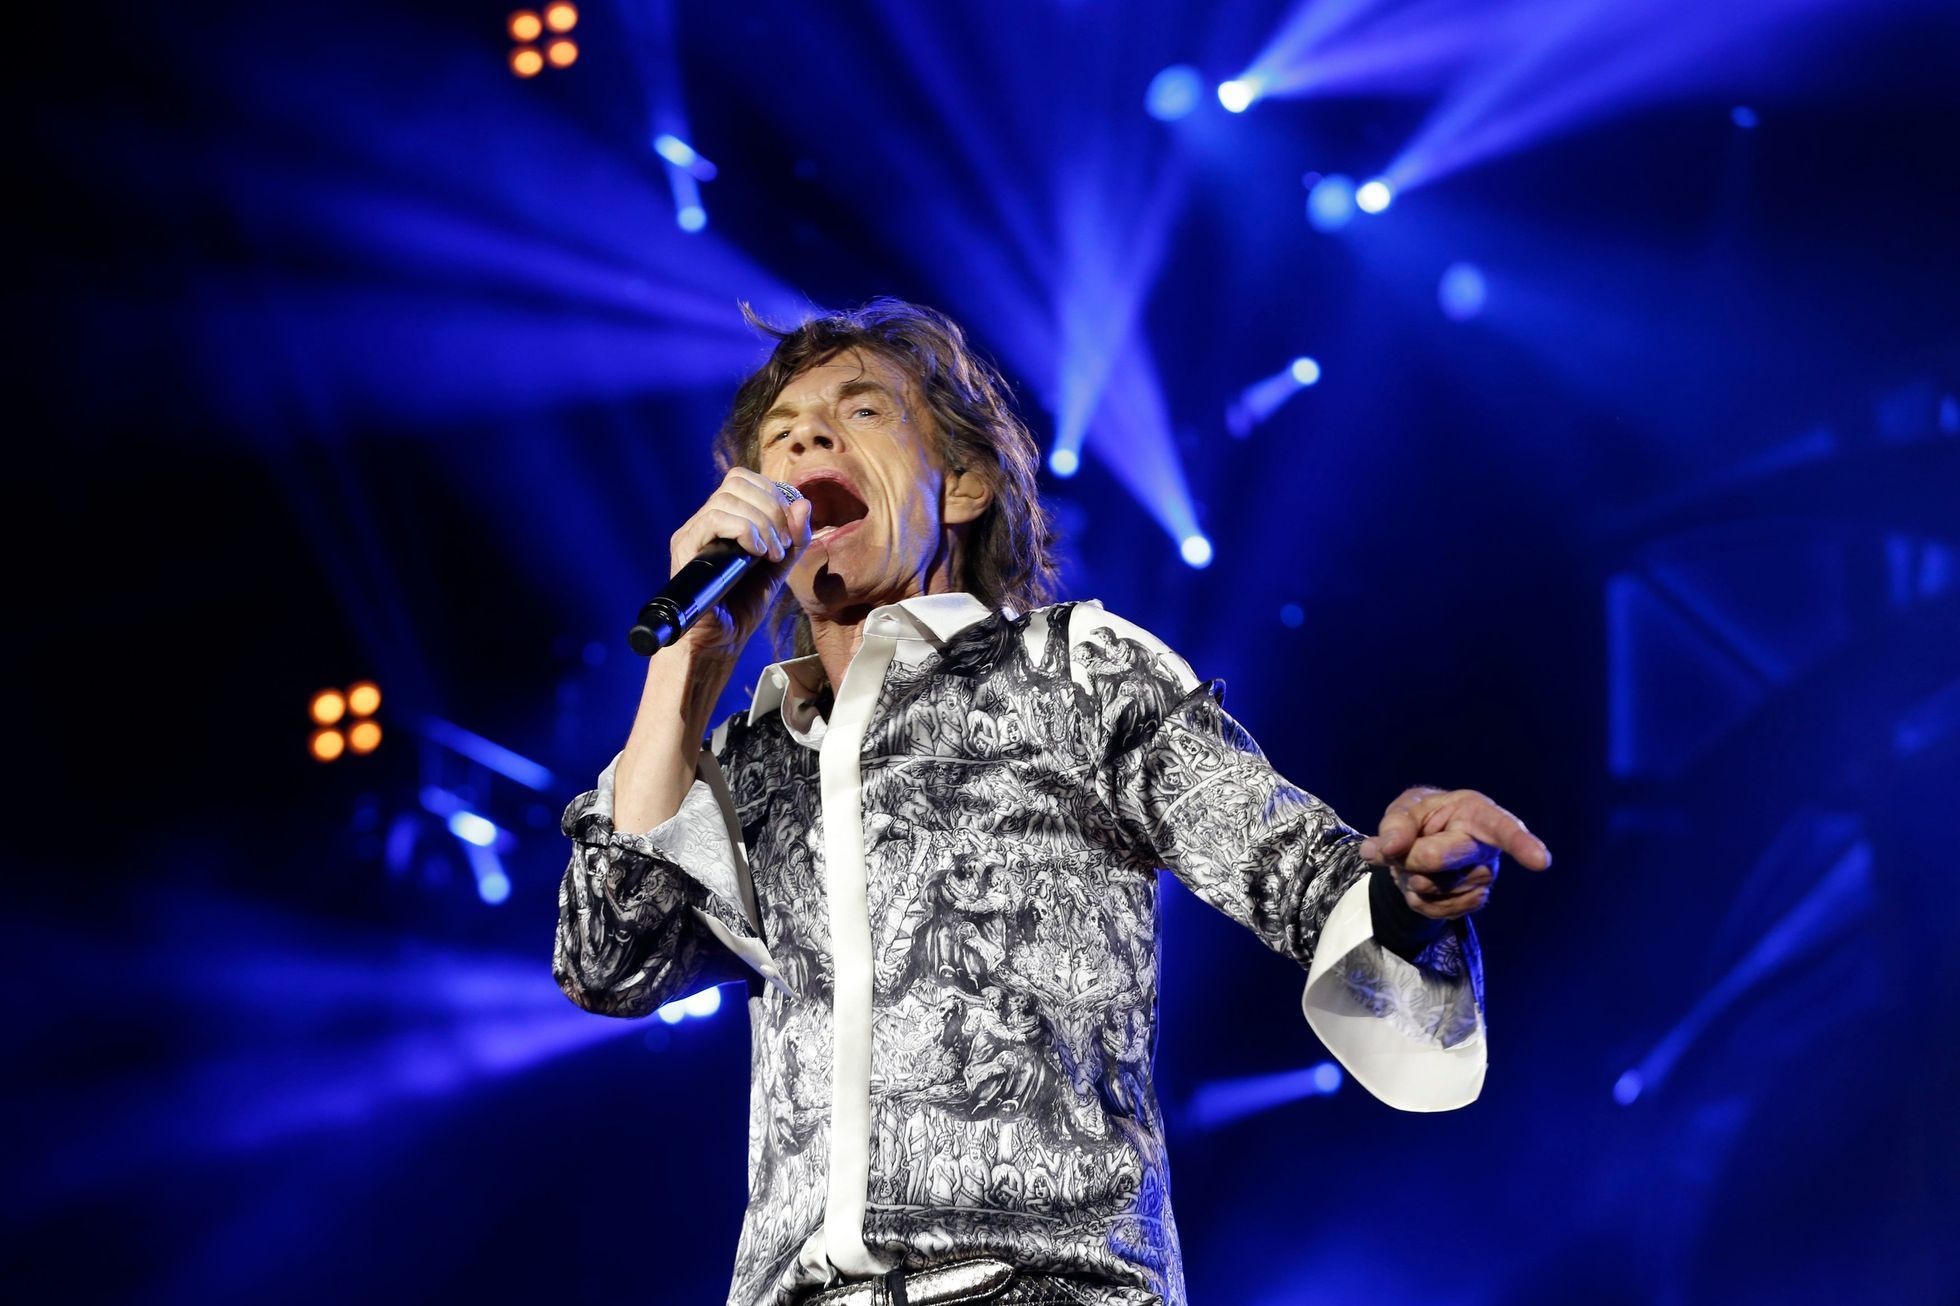 Mick Jagger and the Rolling Stones perform during a concert at the Telenor Arena, in Fornebu, Baerum